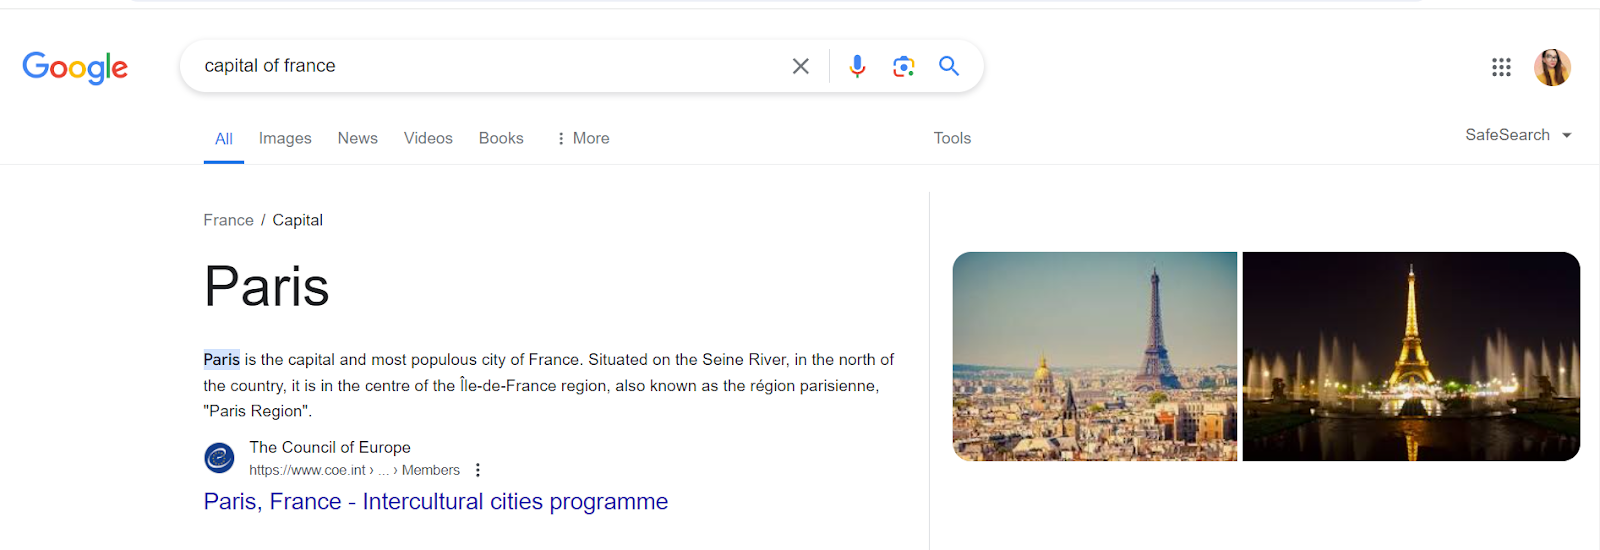 Search query for “Capital of France”